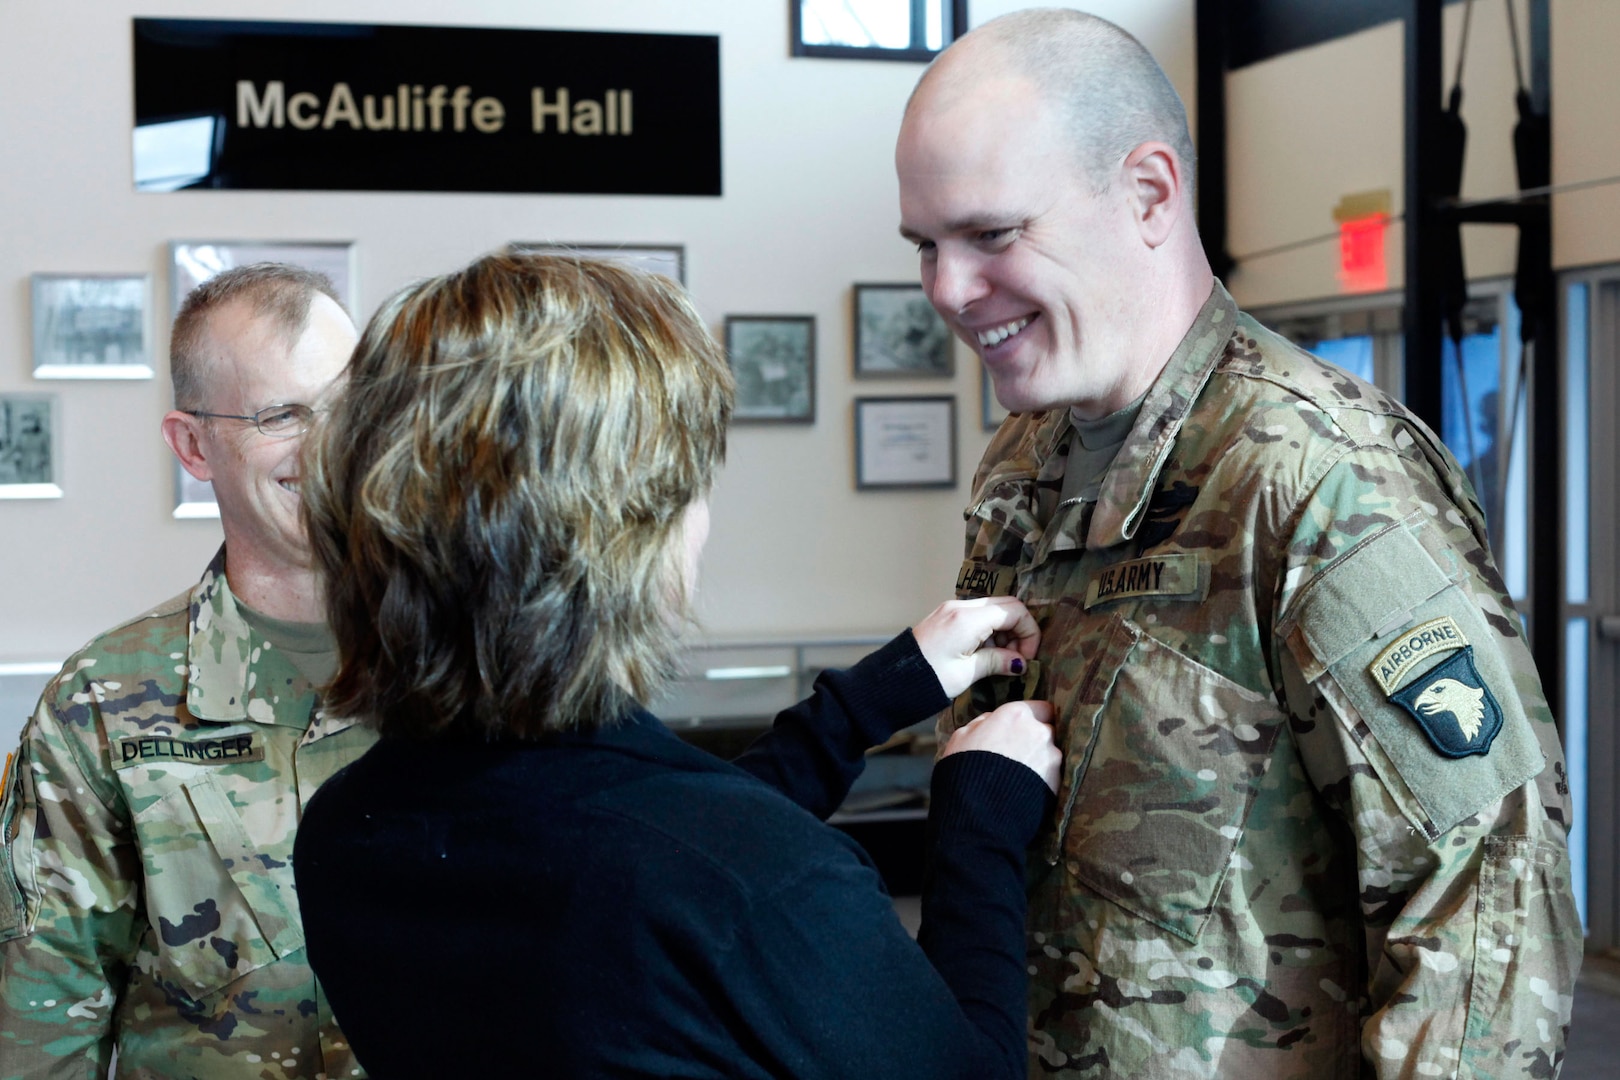 Lt. Col. Cory Mulhern, a liaison officer for the 101st Airborne Division (Air Assault), smiles at his daughter, Sierra, as she pins on his rank during his promotion ceremony in the division headquarters, Fort Campbell, Kentucky, Feb. 11, 2016. Mulhern, a guardsman with the Wisconsin National Guard, is part of the 101st’s multi-component unit, a pilot program where Guard and active duty Soldiers train and deploy together.